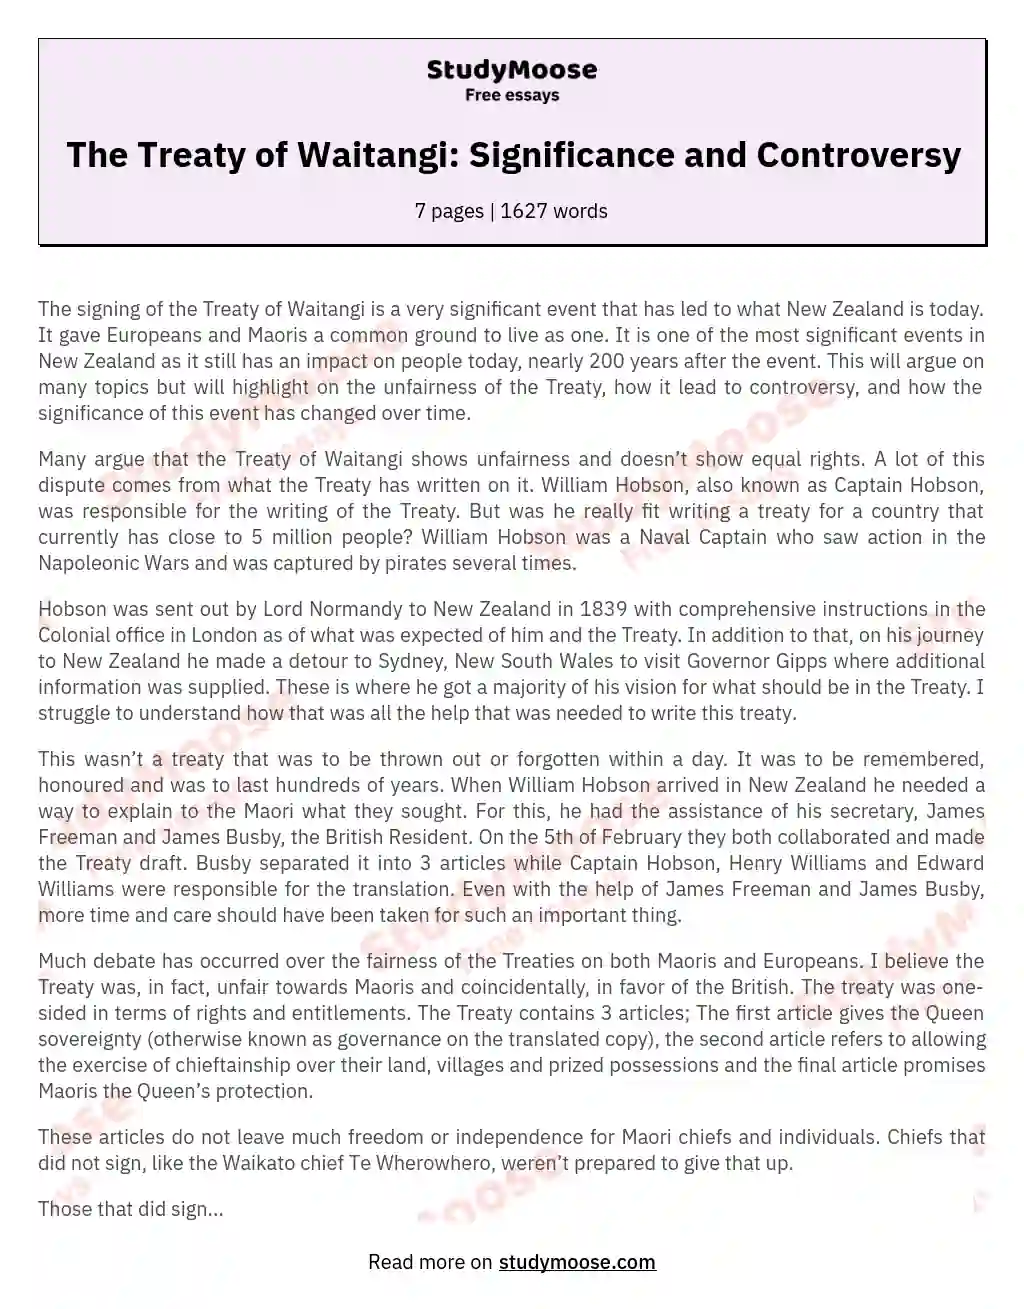 The Treaty of Waitangi: Significance and Controversy